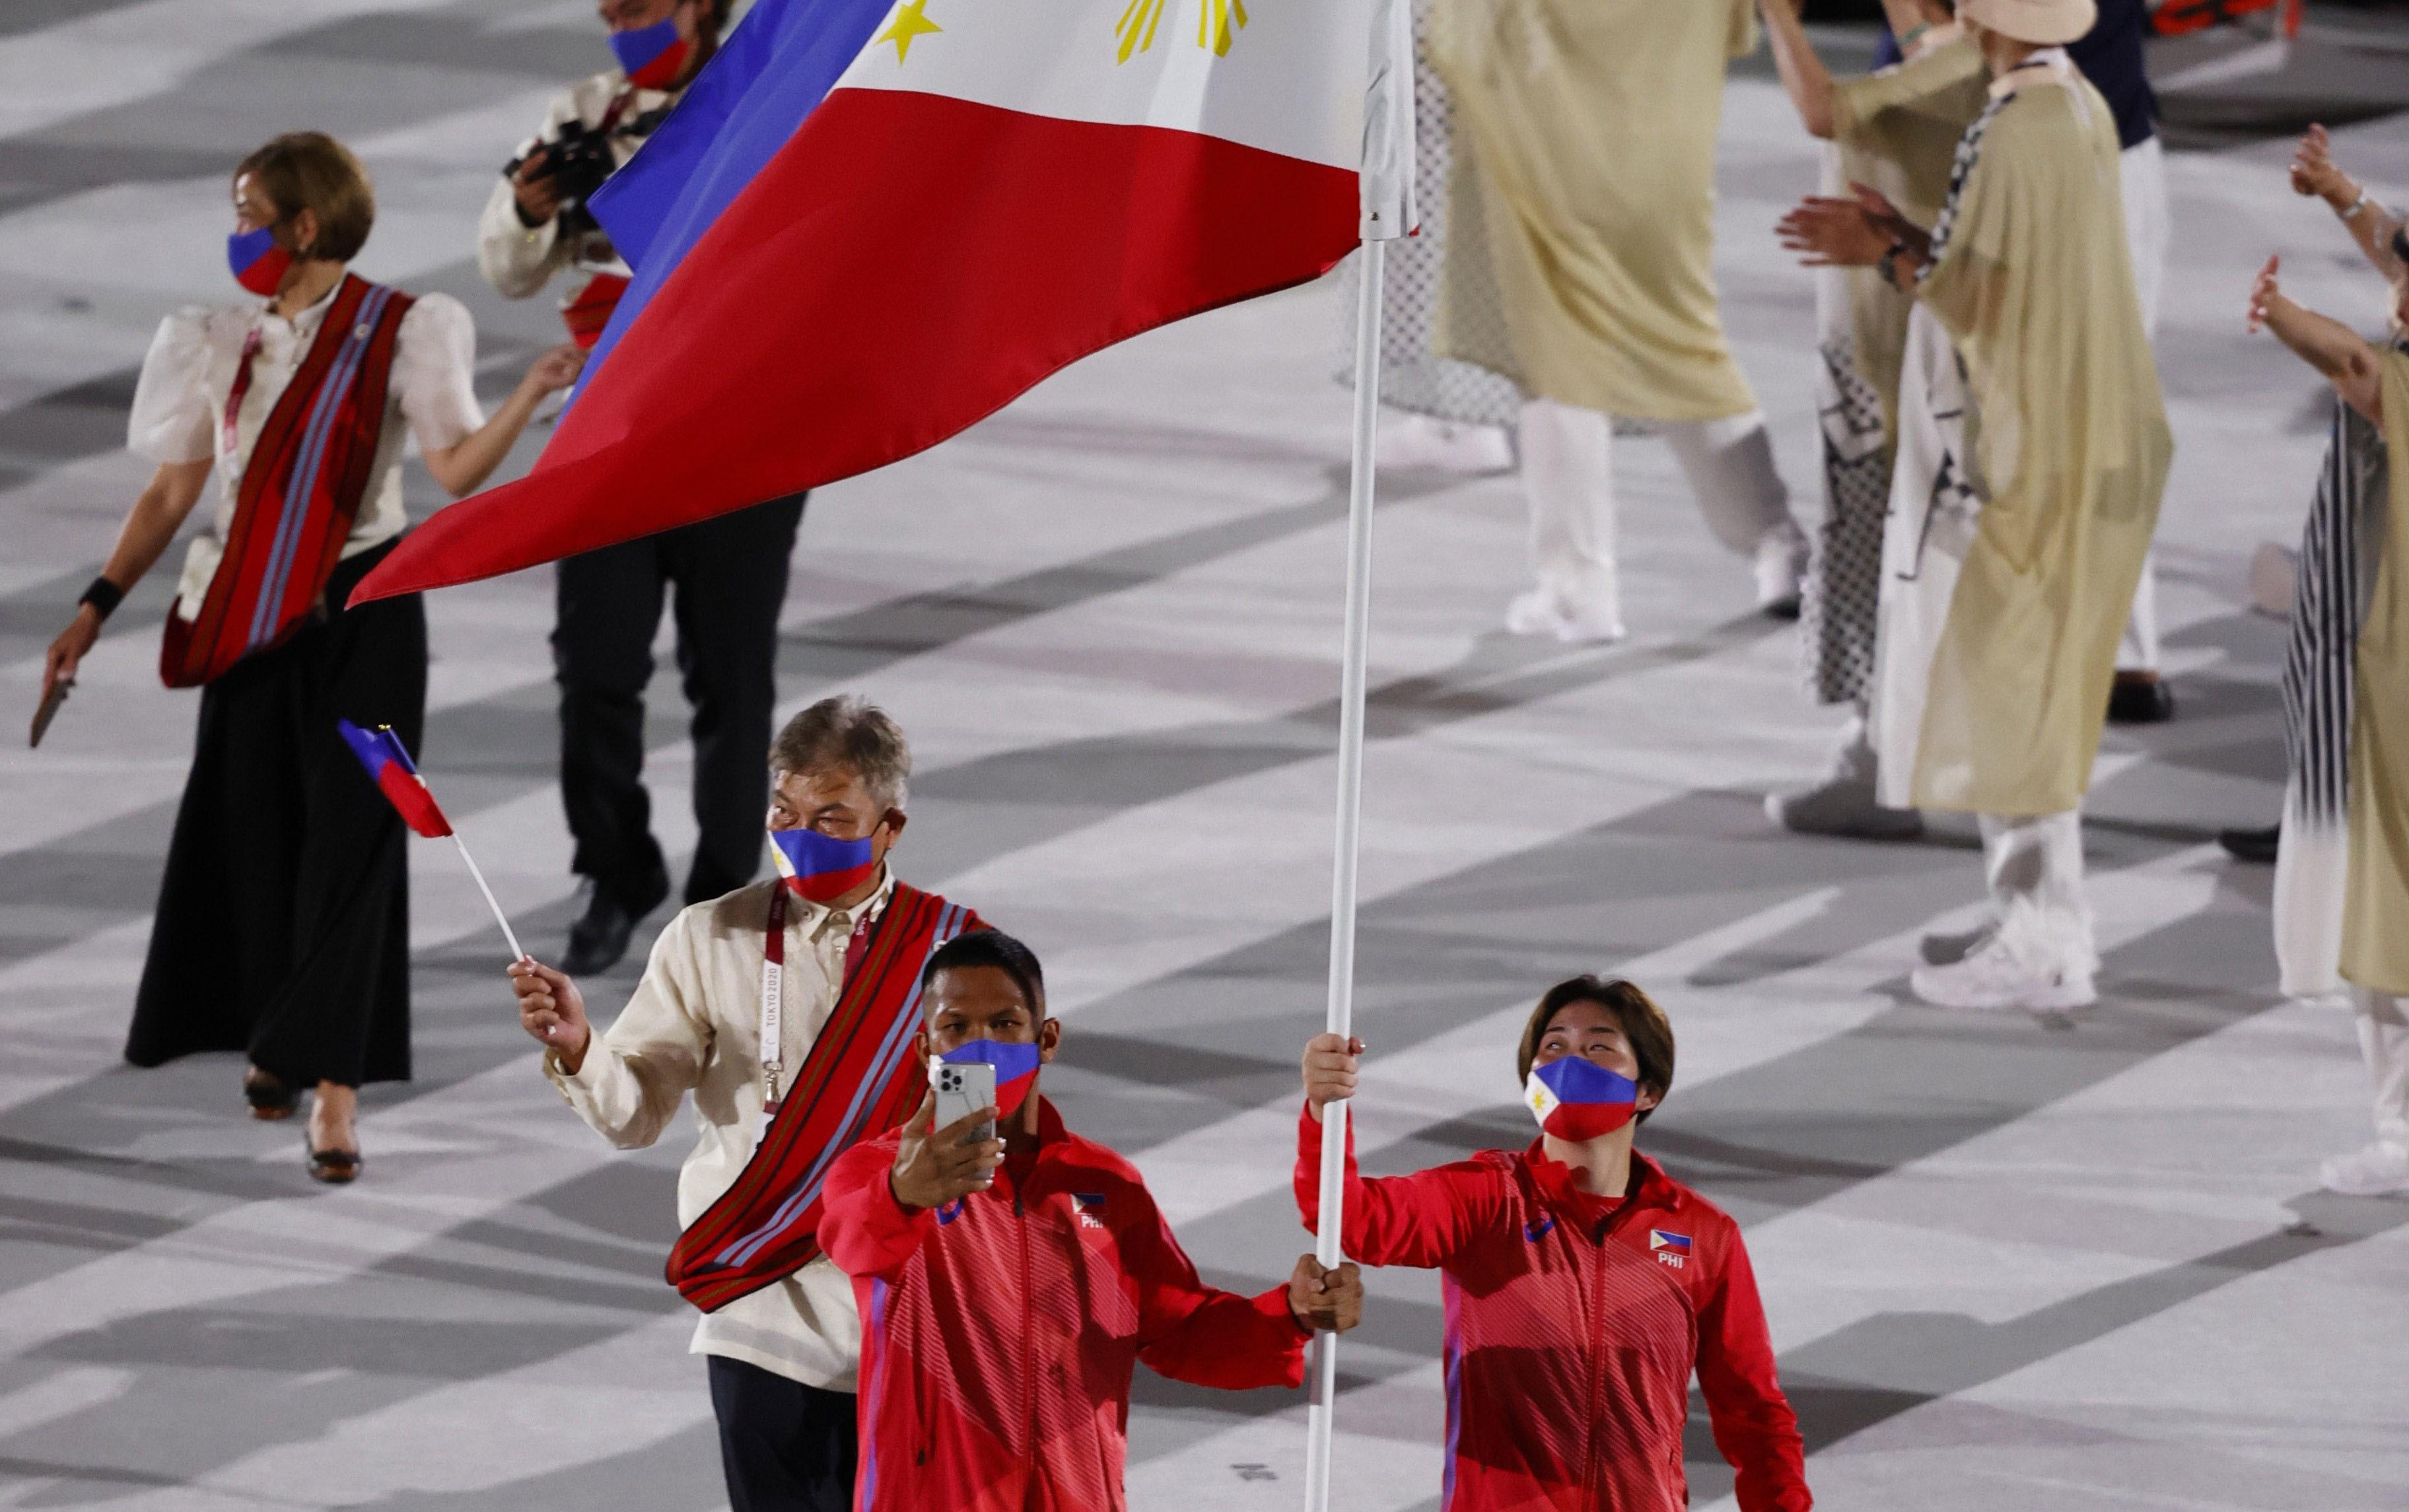 Philippines secures WADA clearance from compliance order –PSC